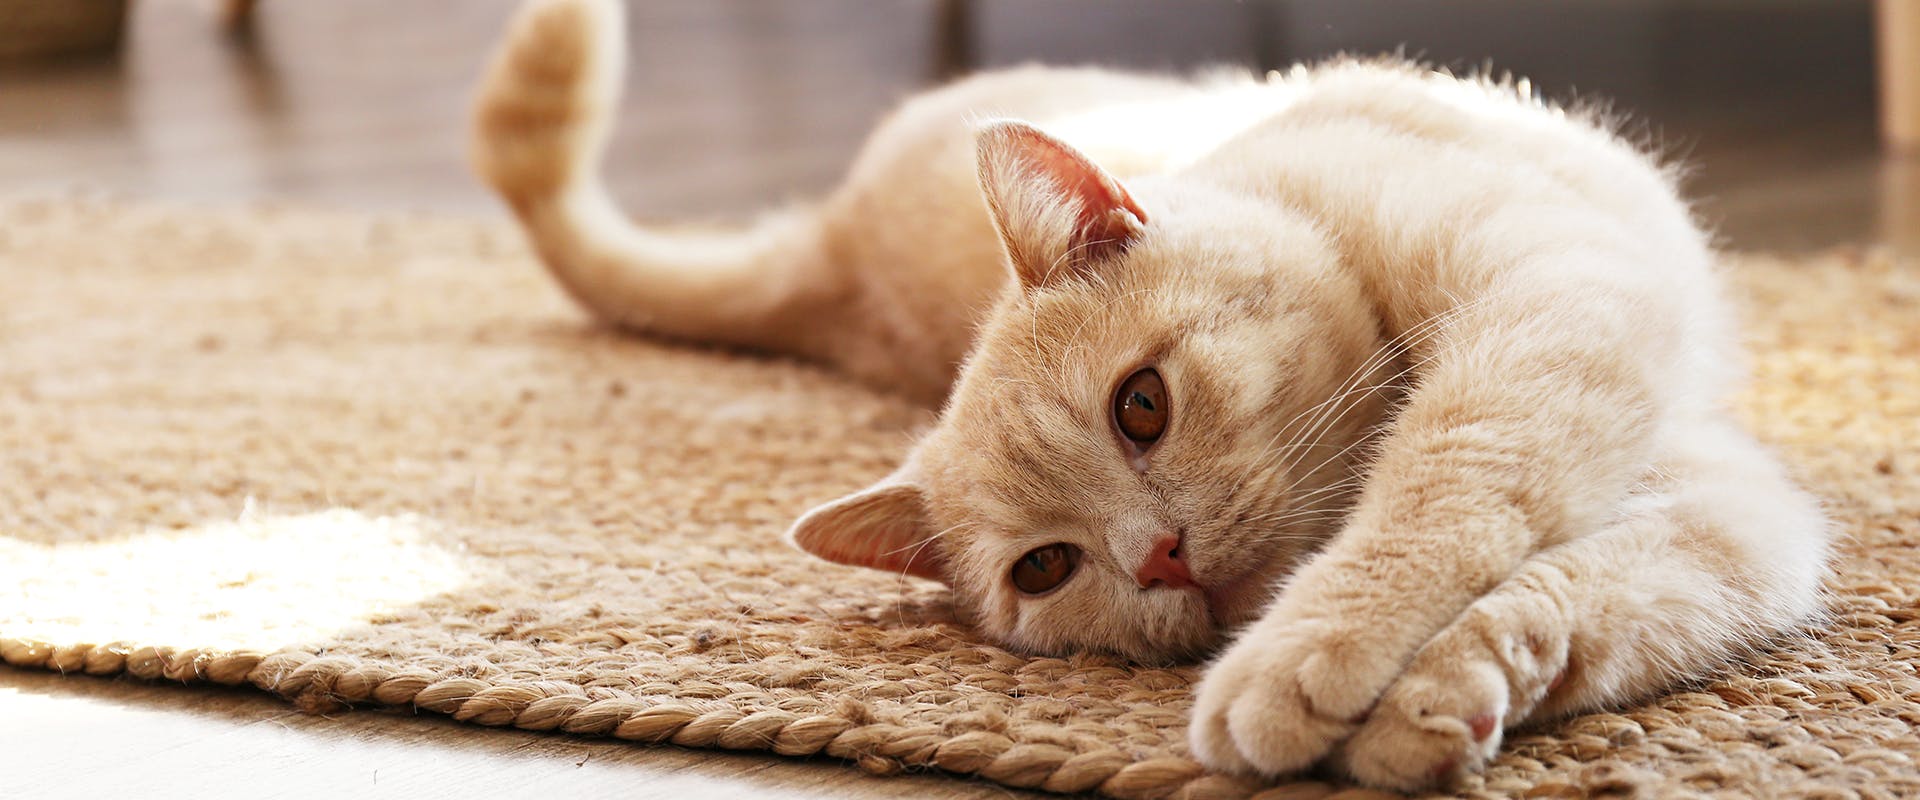 A relaxed, happy cat stretching out on a rug